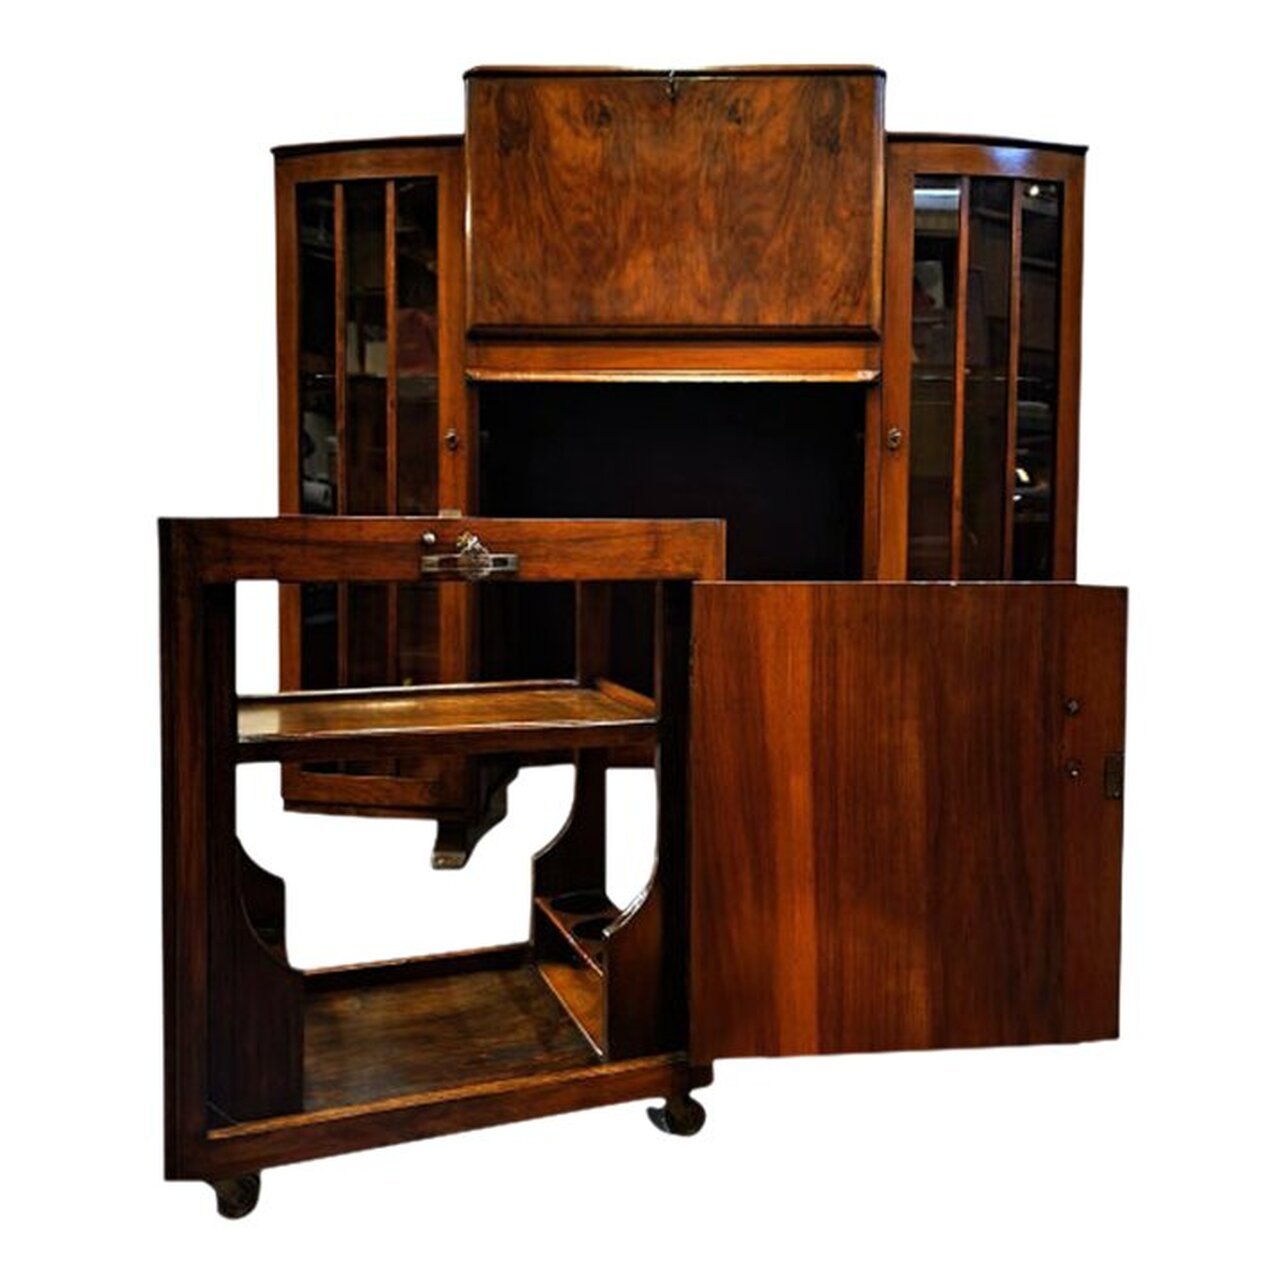 1920s drop-front butler's desk with side-by-side glazed cabinets and removeable bar cart was manufactured in England from burl figured walnut wood (Juglans Regia).  The flat top is leveled and has softly molded edges. The cabinets are topped with curved rear rails.  The drop-front desk is at center, top, and is fitted with pigeonholes separated by curvy dividers. There is storage space above and below the pigeonholes. The space at bottom may store a laptop and keyboard. The work surface on the back of the fall front door is inset with textured green leather. The desk does lock, and a key is provided. The desk sits high, as does a classic butler's desk, so it may be utilized as a standing desk or with a high stool.  Below the desk is a cabinet door that gives access to the installed bar cart; however, with a twist of the key and a press of the button, the bar cart pulls out completely and may be used as a separate piece of furniture, leaving space under the desk to store your work stoolor chair.  The walnut bar cart has a clear glass top above two wooden shelves. On the lower shelf are six holes for bottle storage, three on each side. The bar cart is on casters and rolls easily. The trolley may also be used as a coffee, tea, and cocoa station or as a space for your printer and other office equipment.  Two glazed display cabinets are fitted with two shaped glass shelves each. The cabinets lock and keys are included. These would house drinking glasses and decanters very well.  The keyhole escutcheons on the desk and the cabinet doors are shaped and marbled thermoplastic, similar to Catalin and Bakelite, in caramel, amber, and root beer tones.  The keyhole escutcheon on the bar cart is a scalloped roundel in brass.